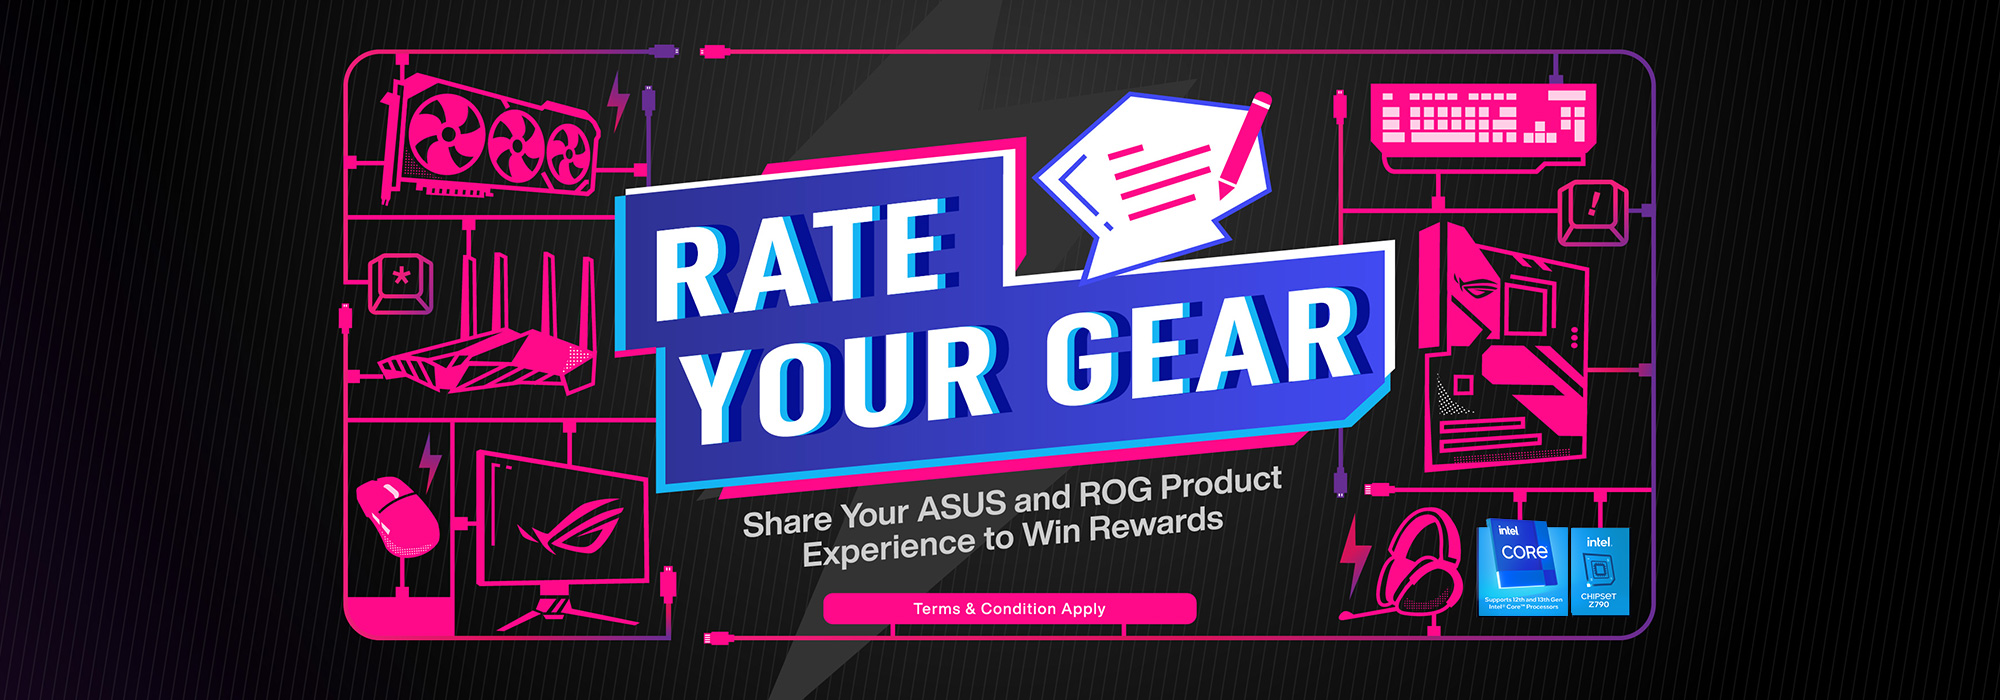 RATE YOUR GEAR - Share Your ASUS and ROG Product Experience to Win Rewards (Terms & Condition Apply)